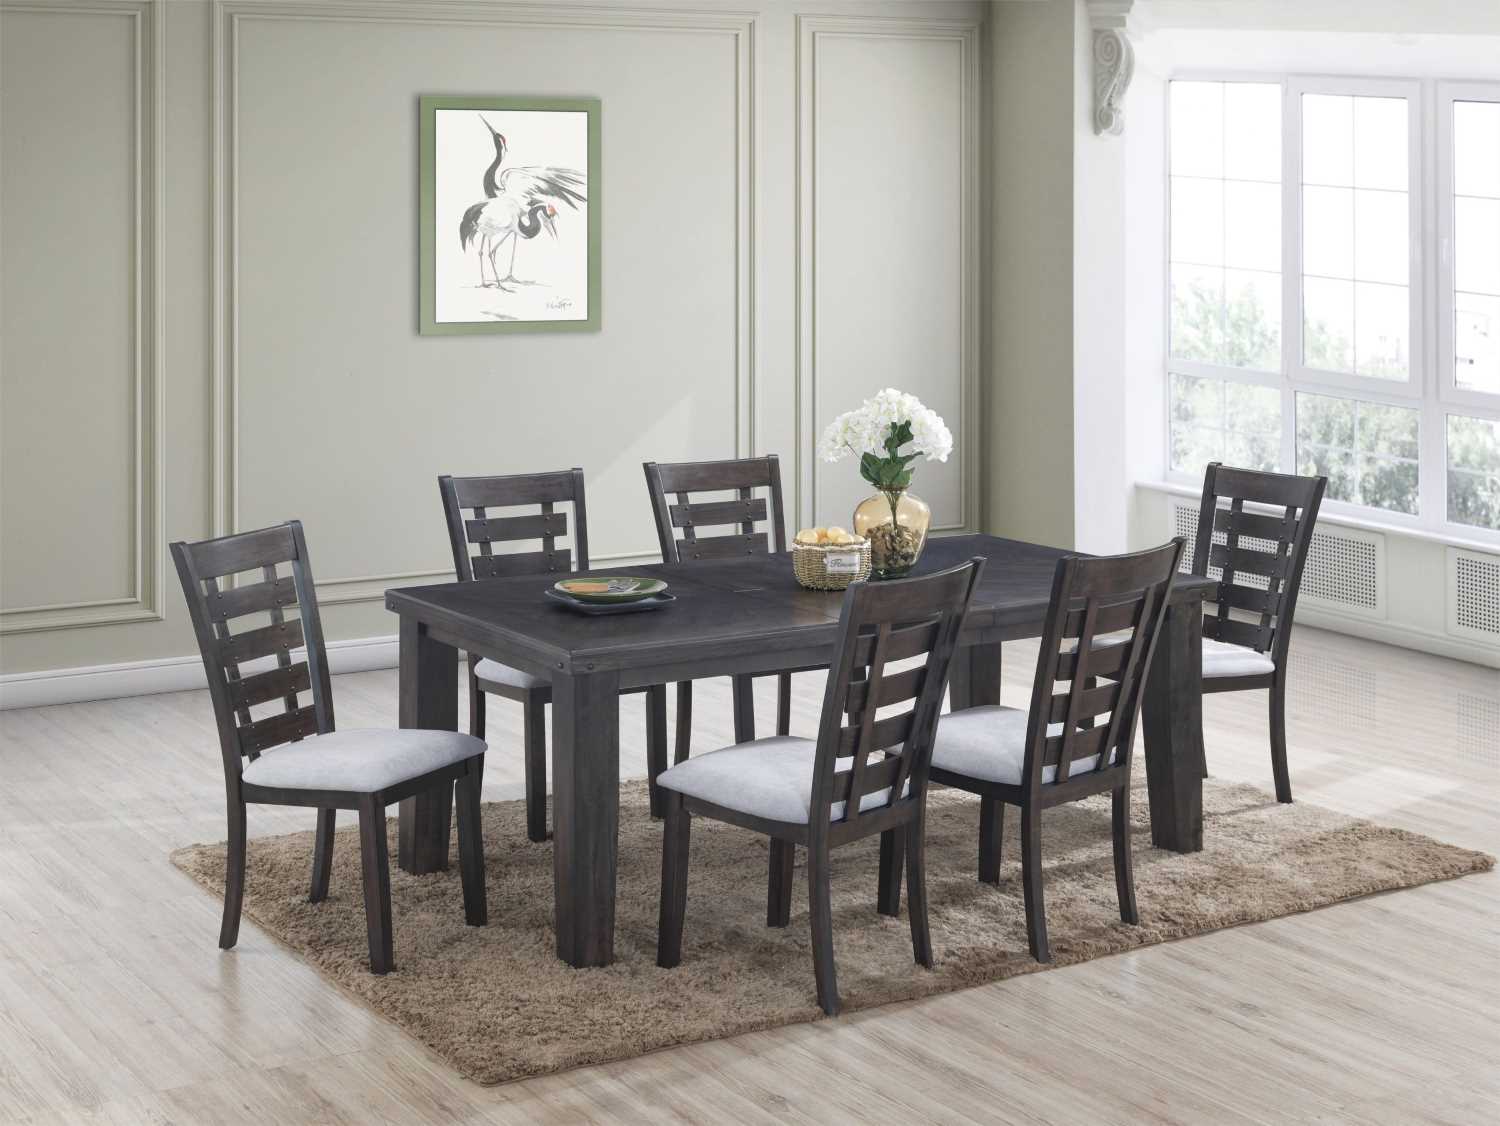 Bailey Butterfly Dining Set With 6 Chairs